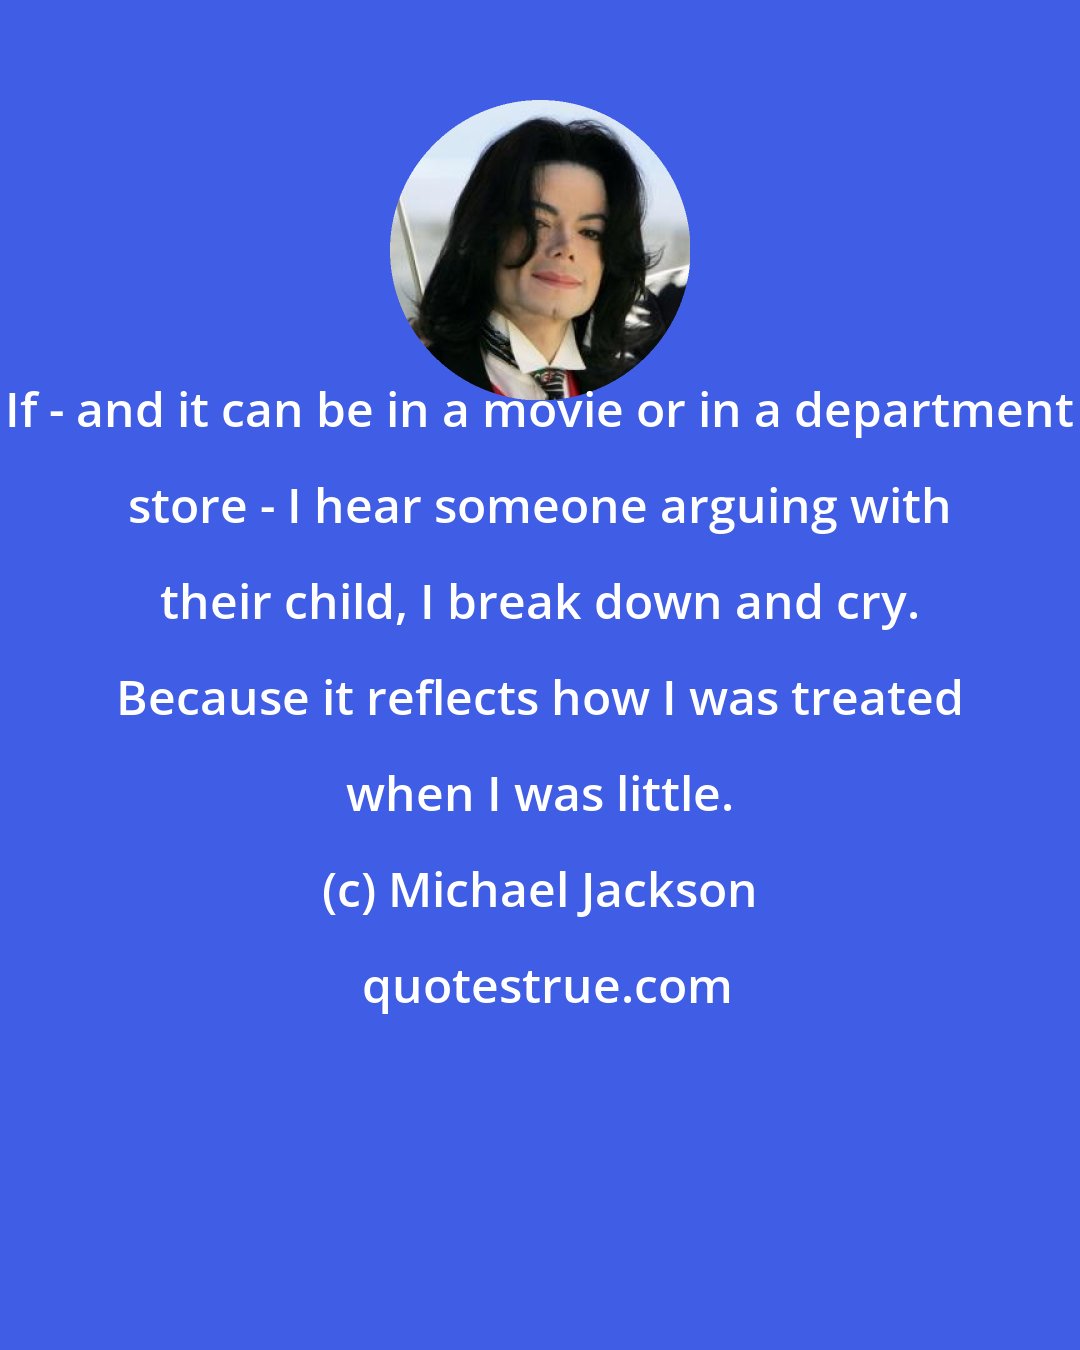 Michael Jackson: If - and it can be in a movie or in a department store - I hear someone arguing with their child, I break down and cry. Because it reflects how I was treated when I was little.